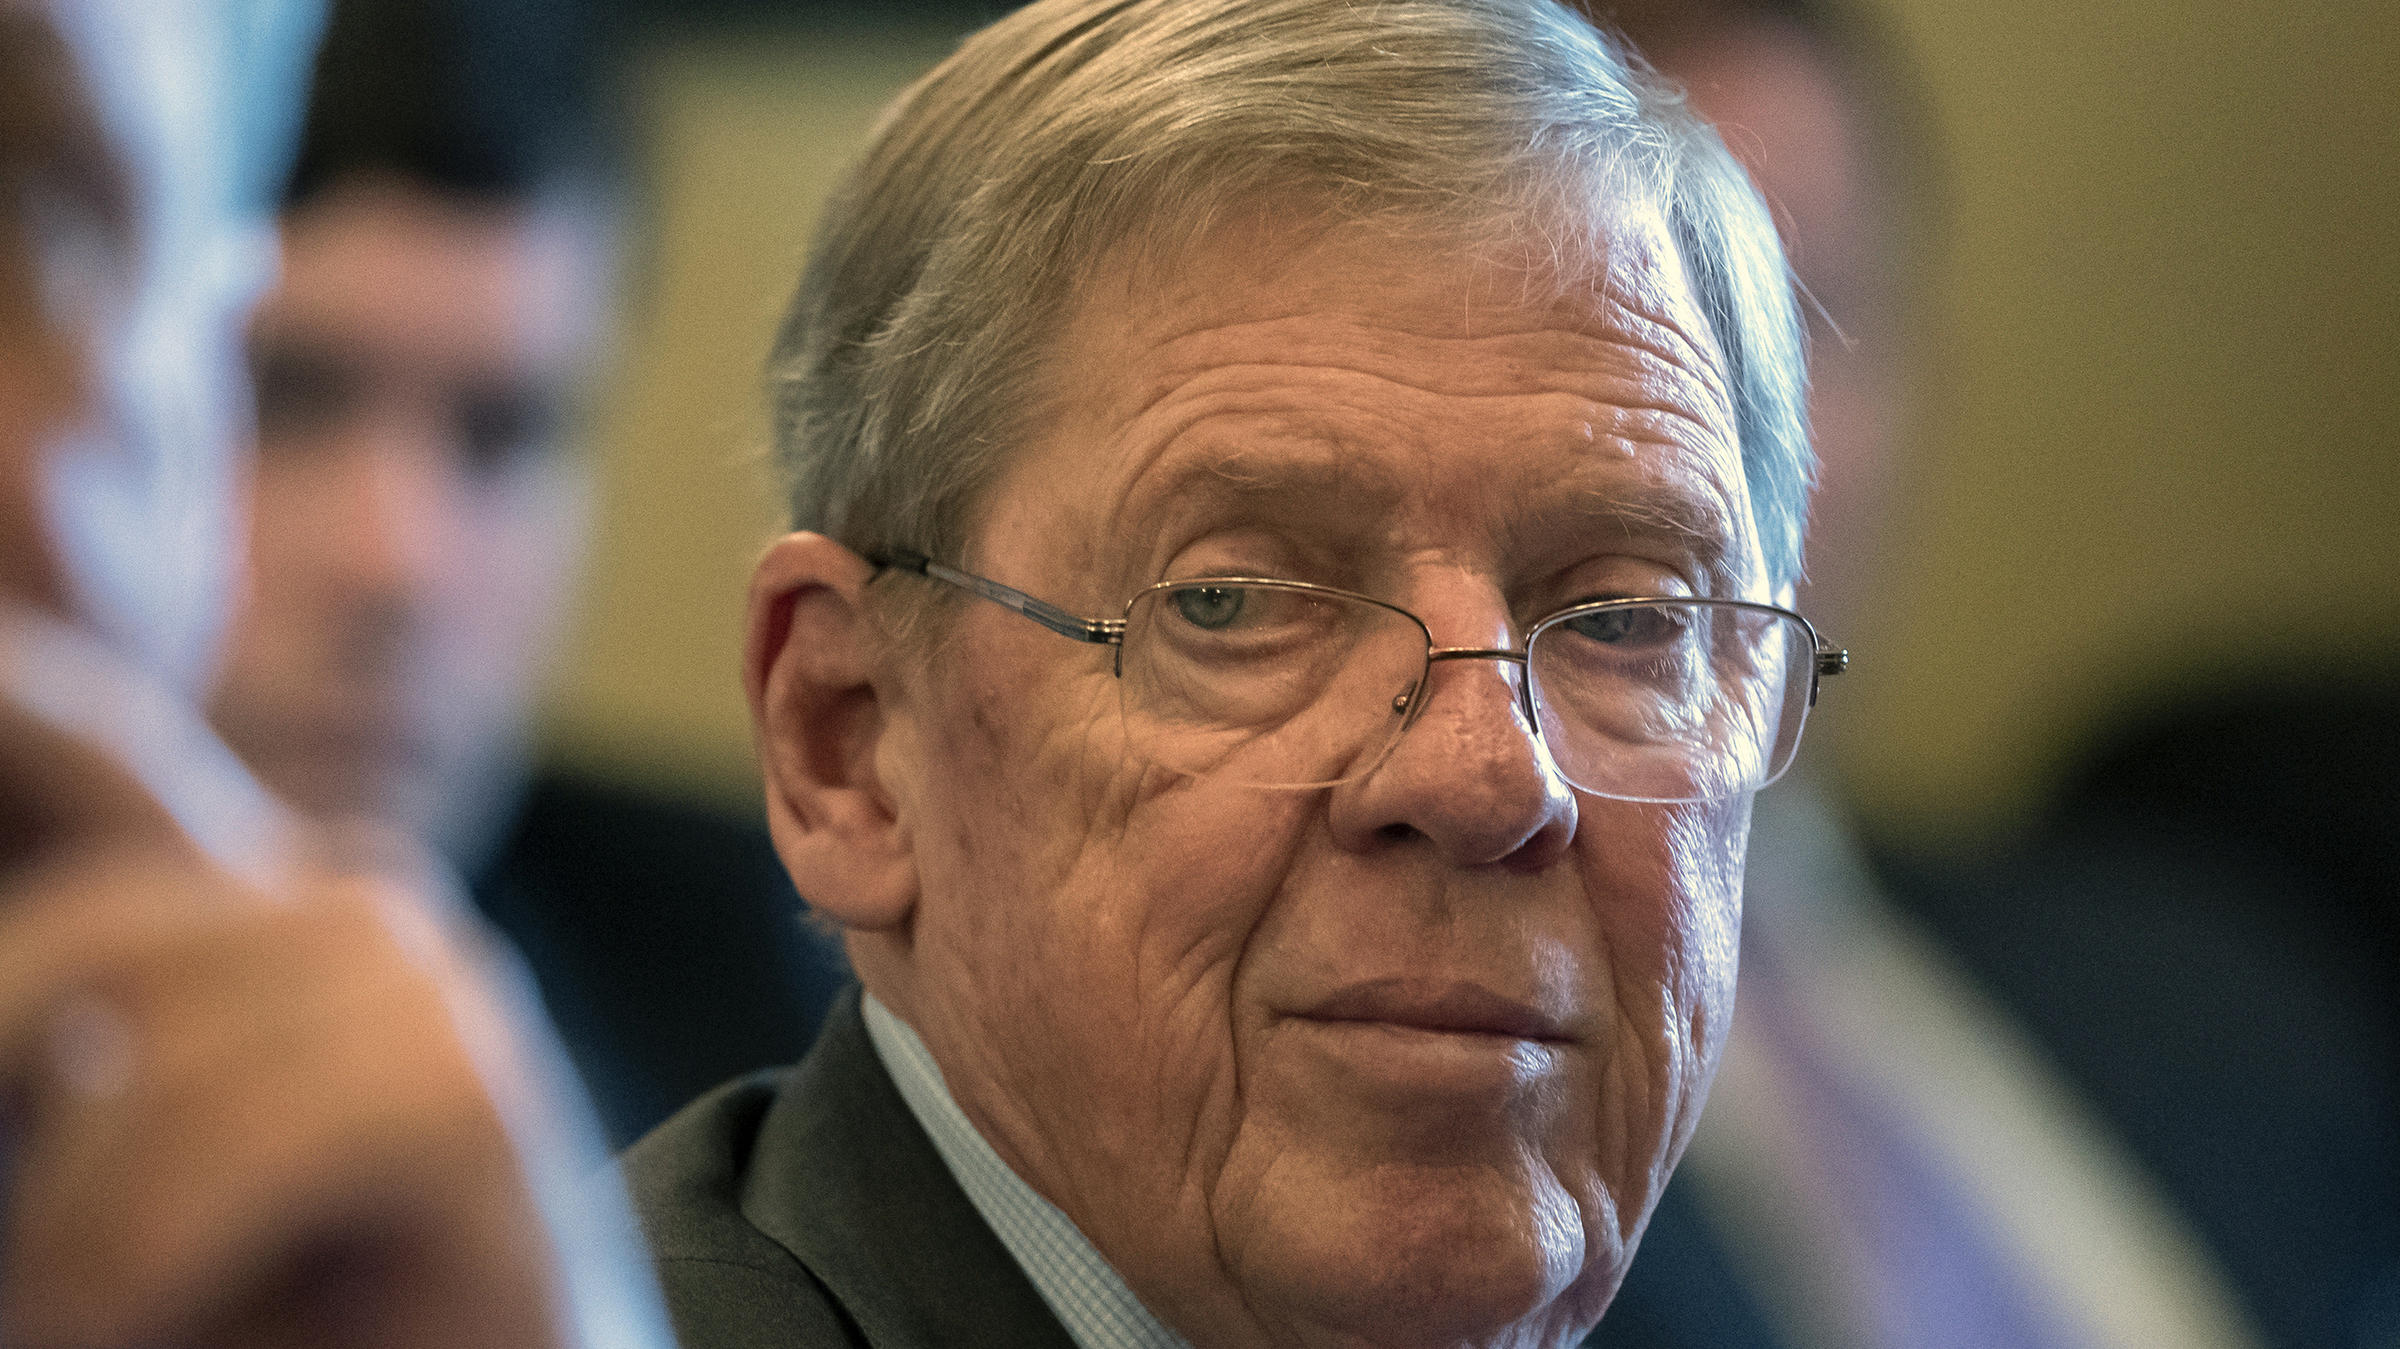 Georgia Senator Johnny Isakson will step down at the end of 2019